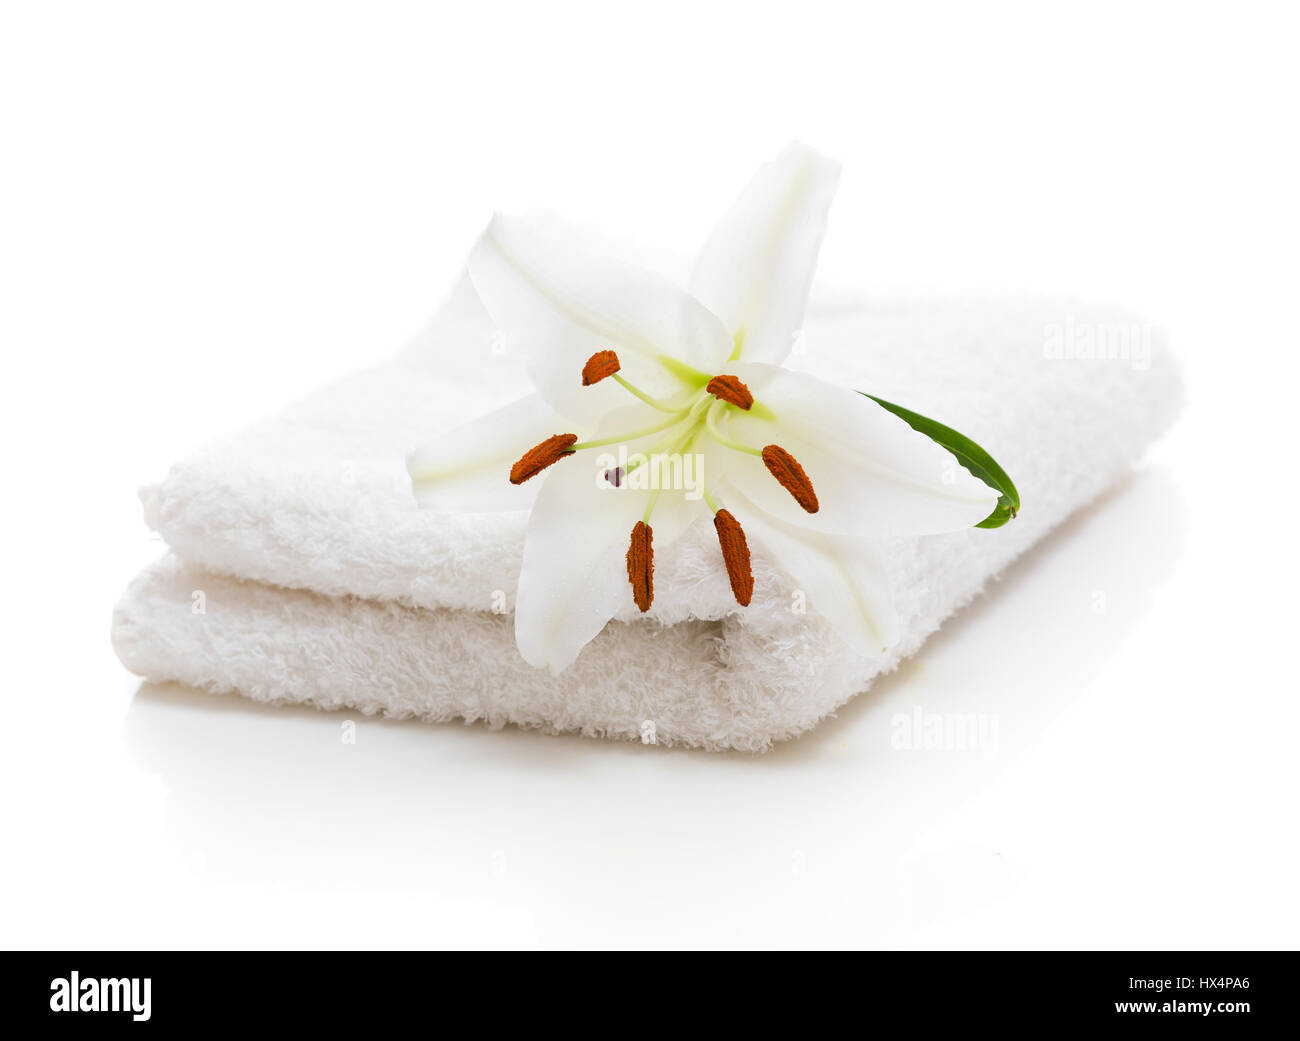 Flower white Lily lying on a white towel Stock Photo